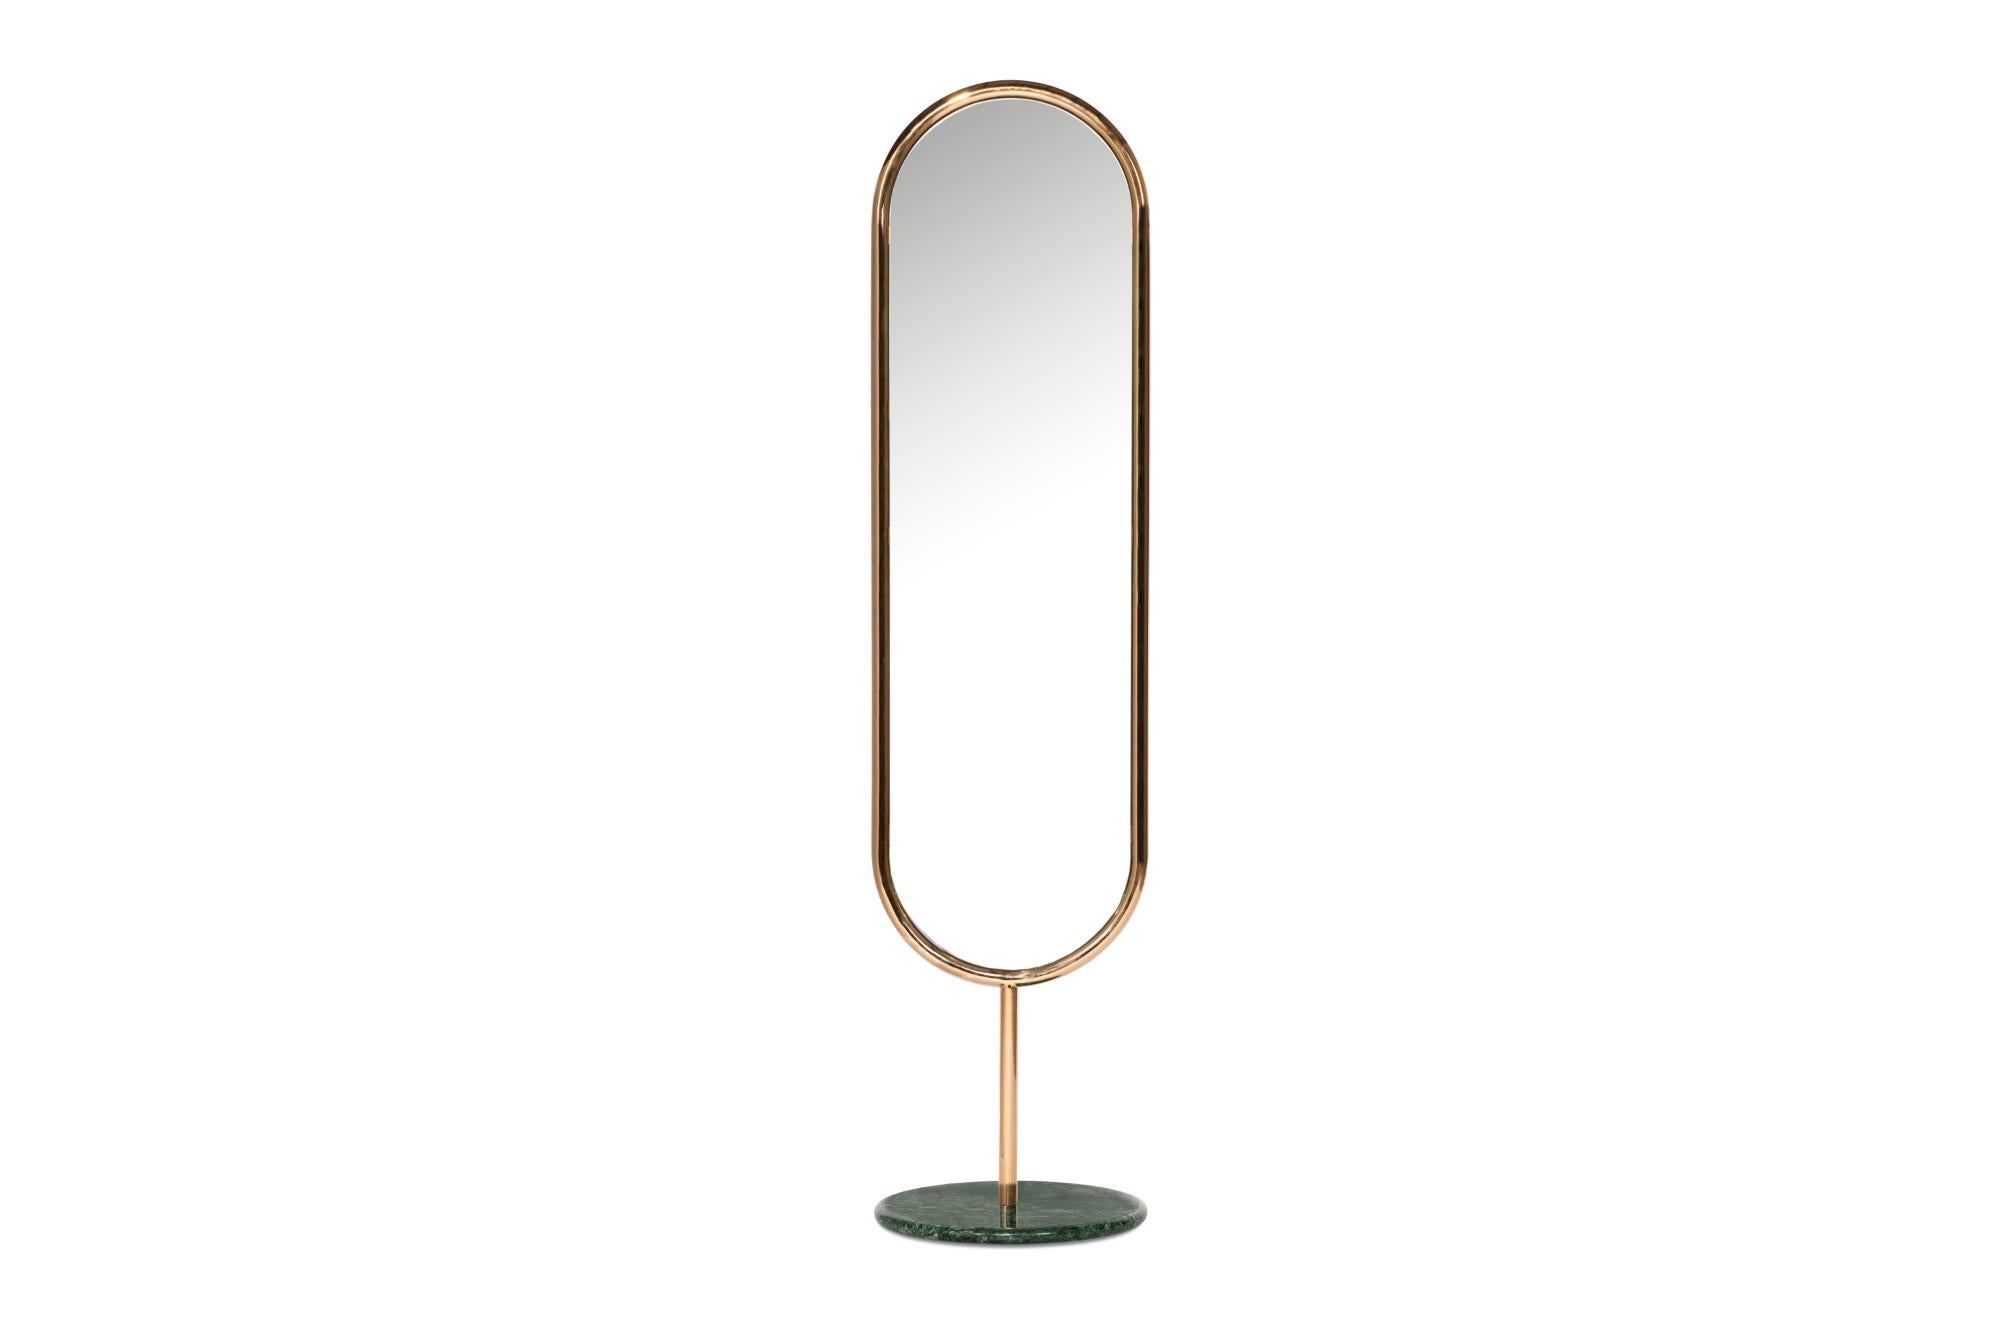 Polished brass and Green Marble Marshmallow floor mirror, Royal Stranger
Dimensions: 183 x 44 x 44 cm
Materials: Polished brass structure standing on the top of a Guatemala Green marble.

Available in brass, stainless steel, and copper with polished